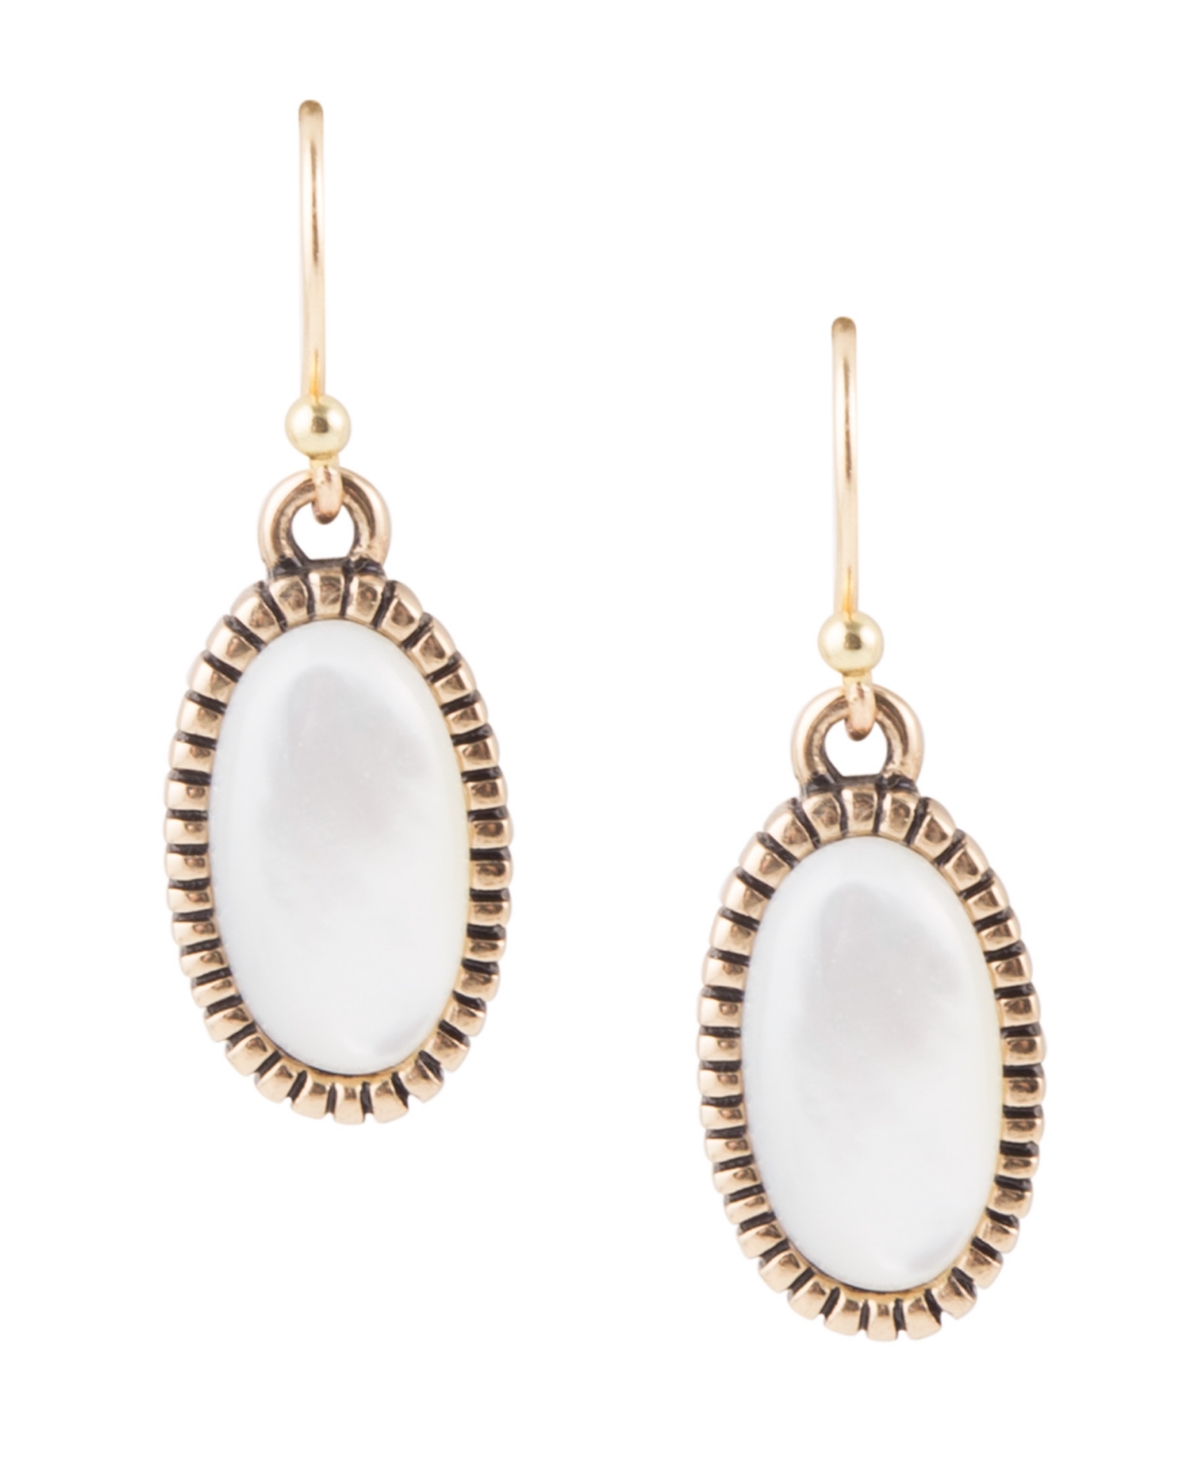 Shop Barse Roman Bronze And Genuine Mother-of-pearl Drop Earrings